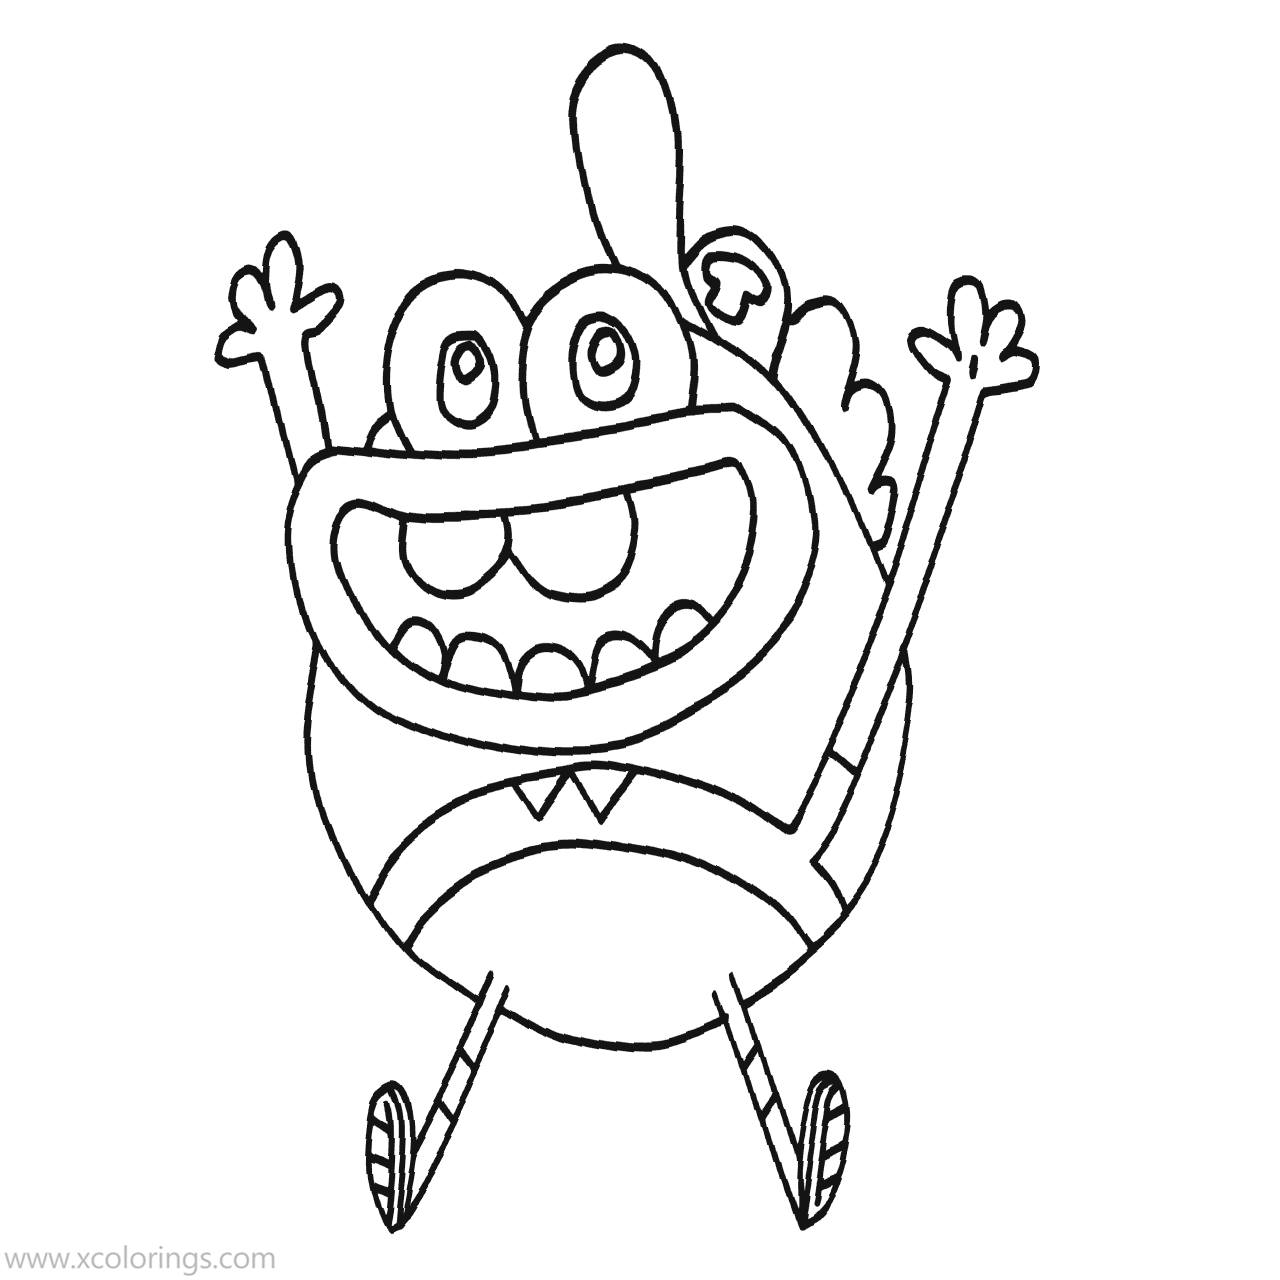 Free Breadwinners Coloring Pages Buhdeuce is Happy printable